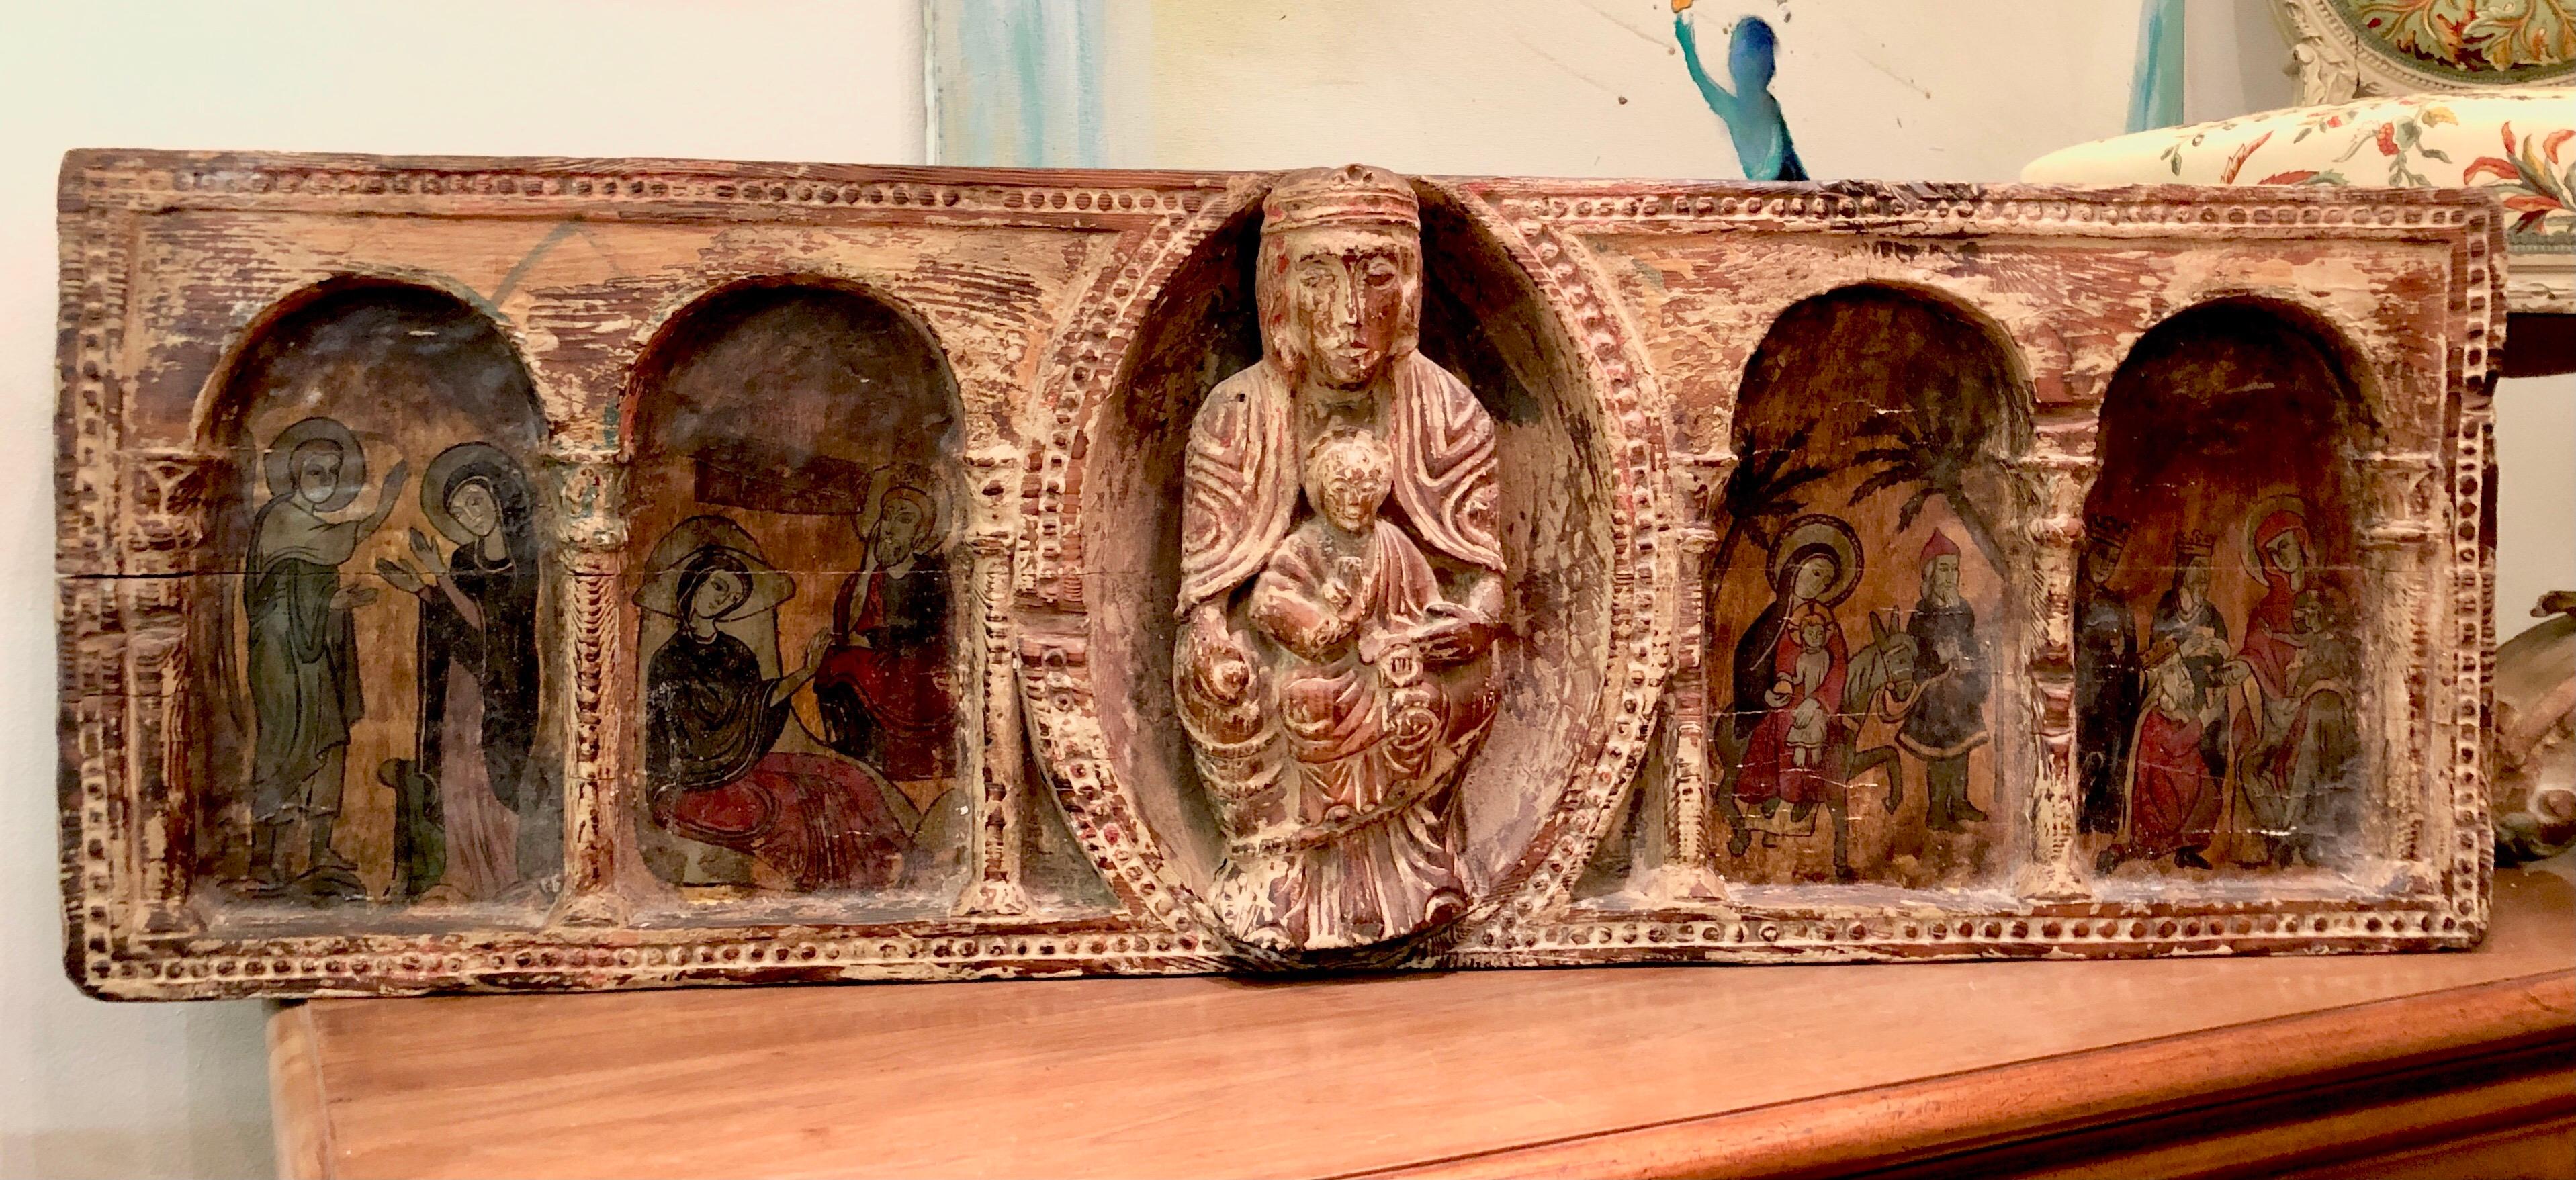 Antique piece of an altar hand carved of a single piece of wood. There is Virgin Mary holding Christ in the centre surrounded by four religions scenes.
France, circa 1900.